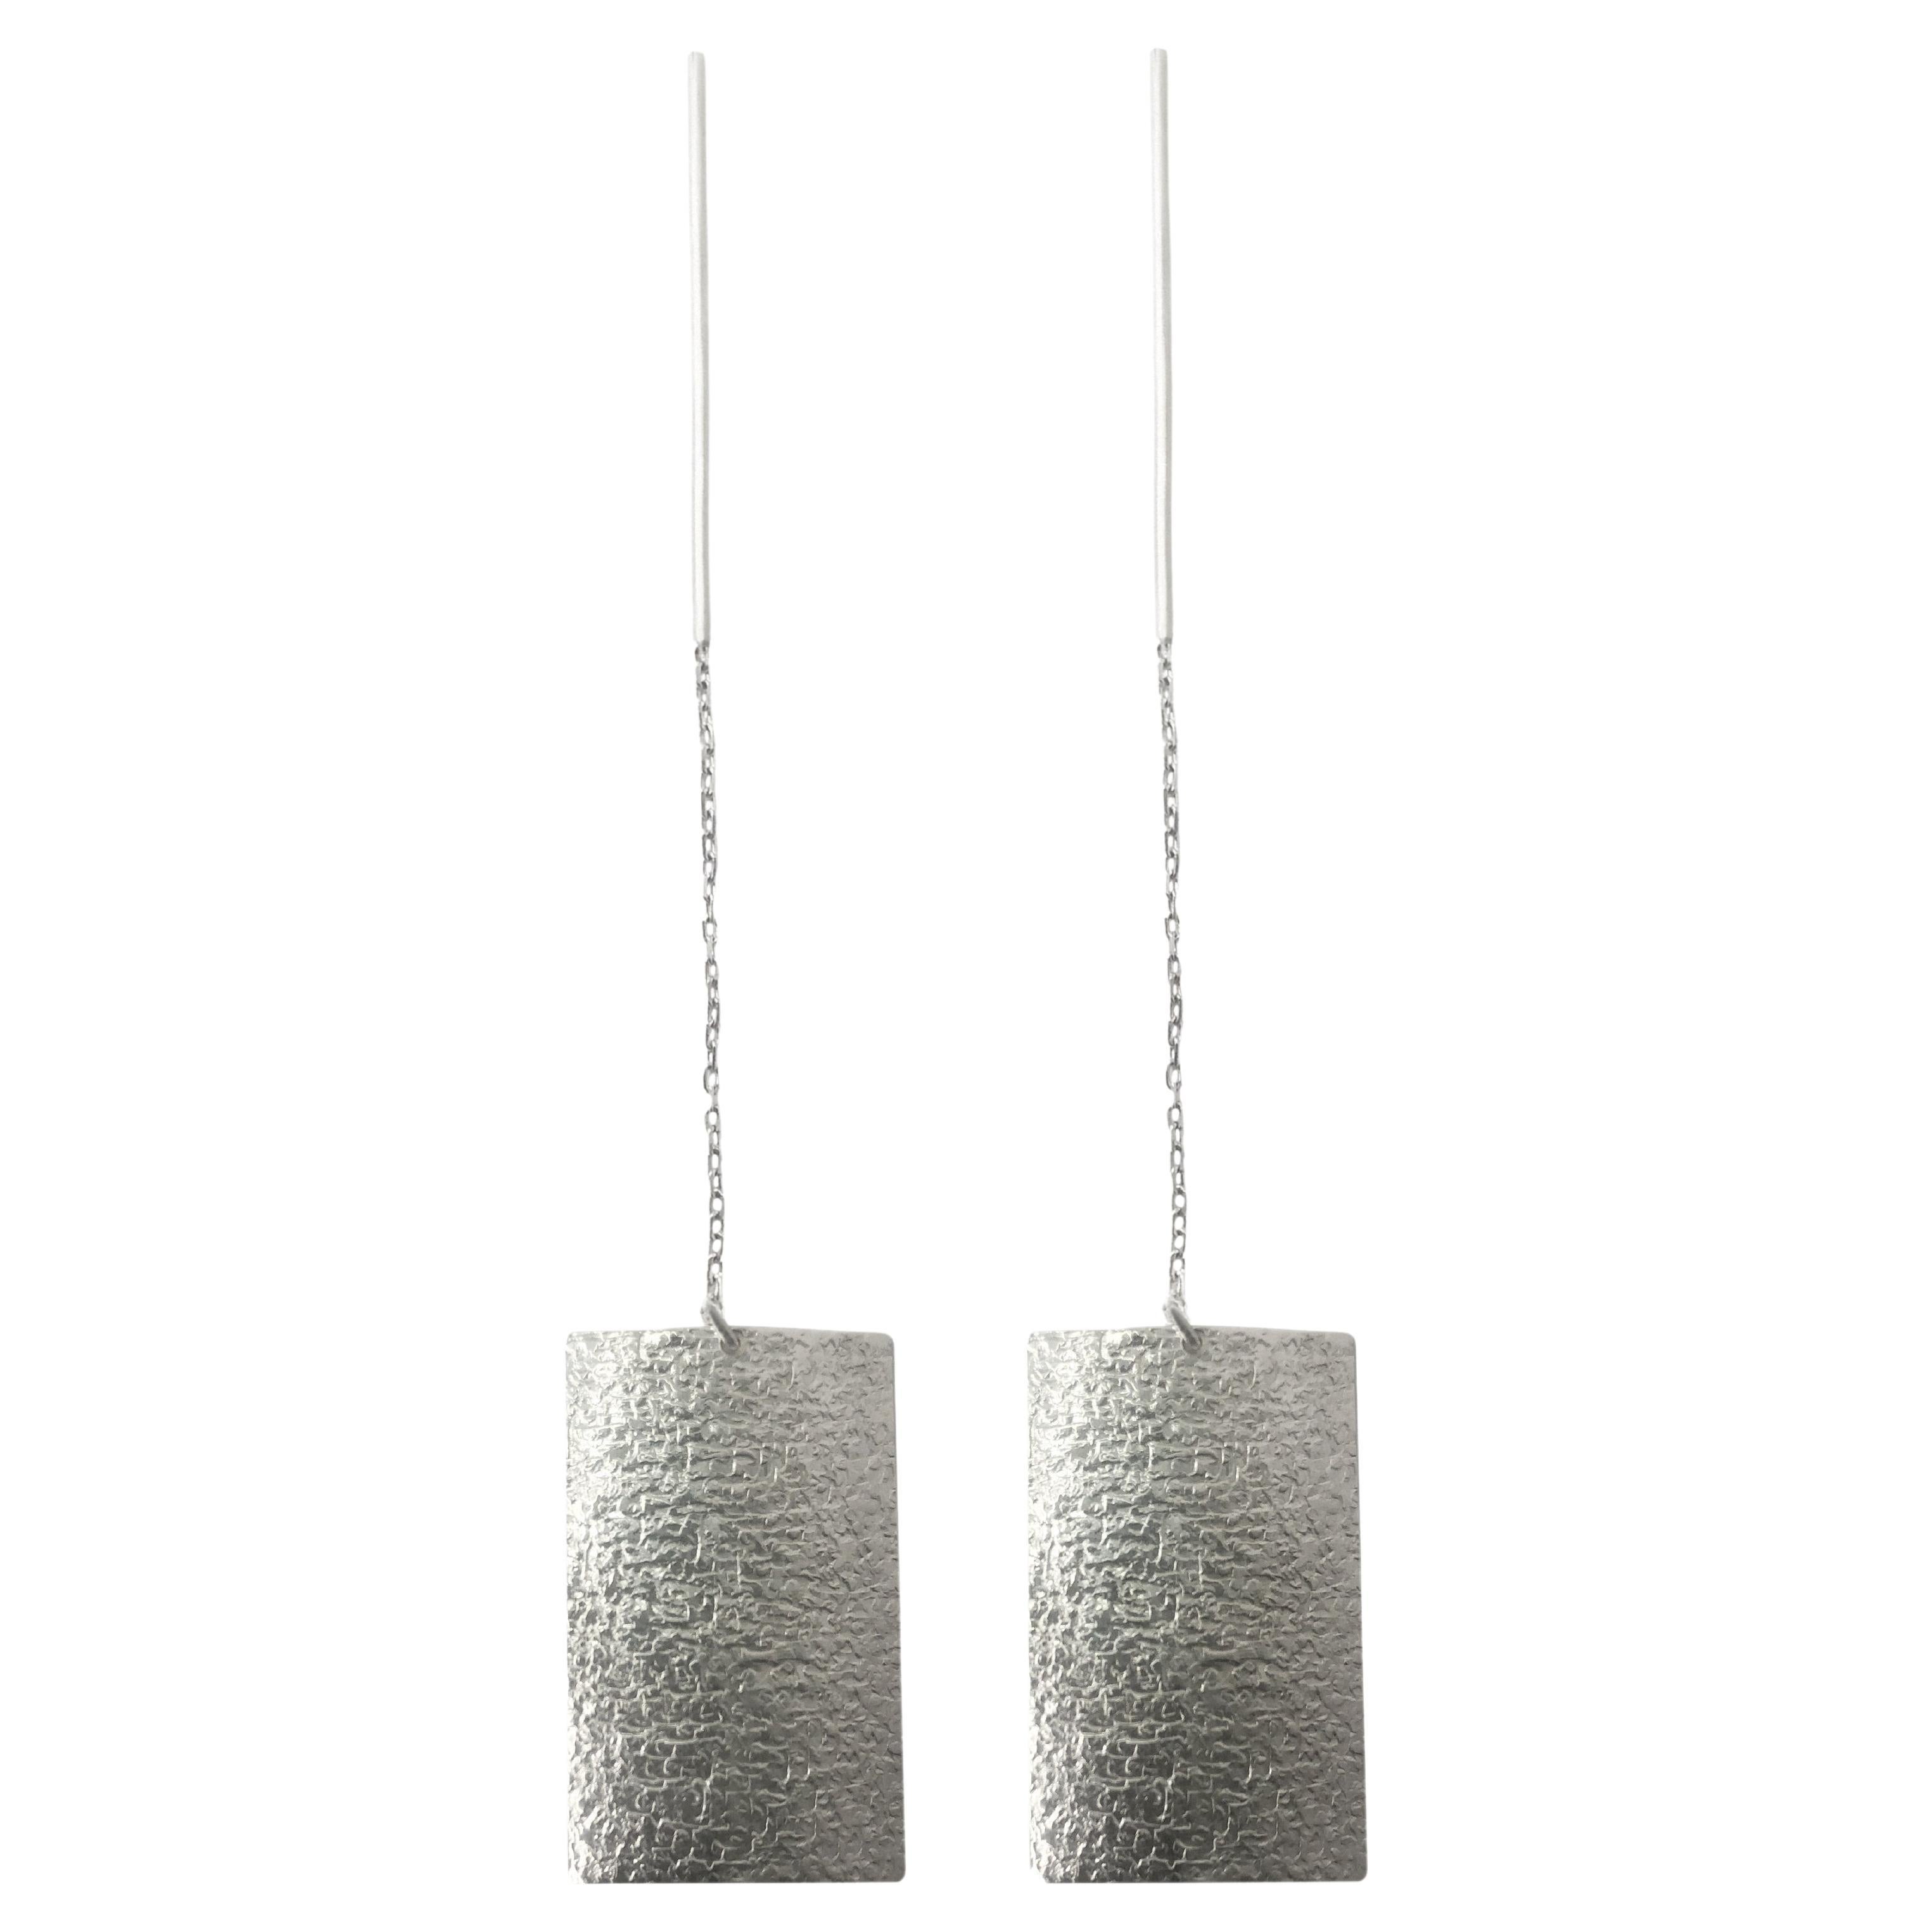 Pair pendant contemporary threaders chain earrings with minimalistic texture For Sale